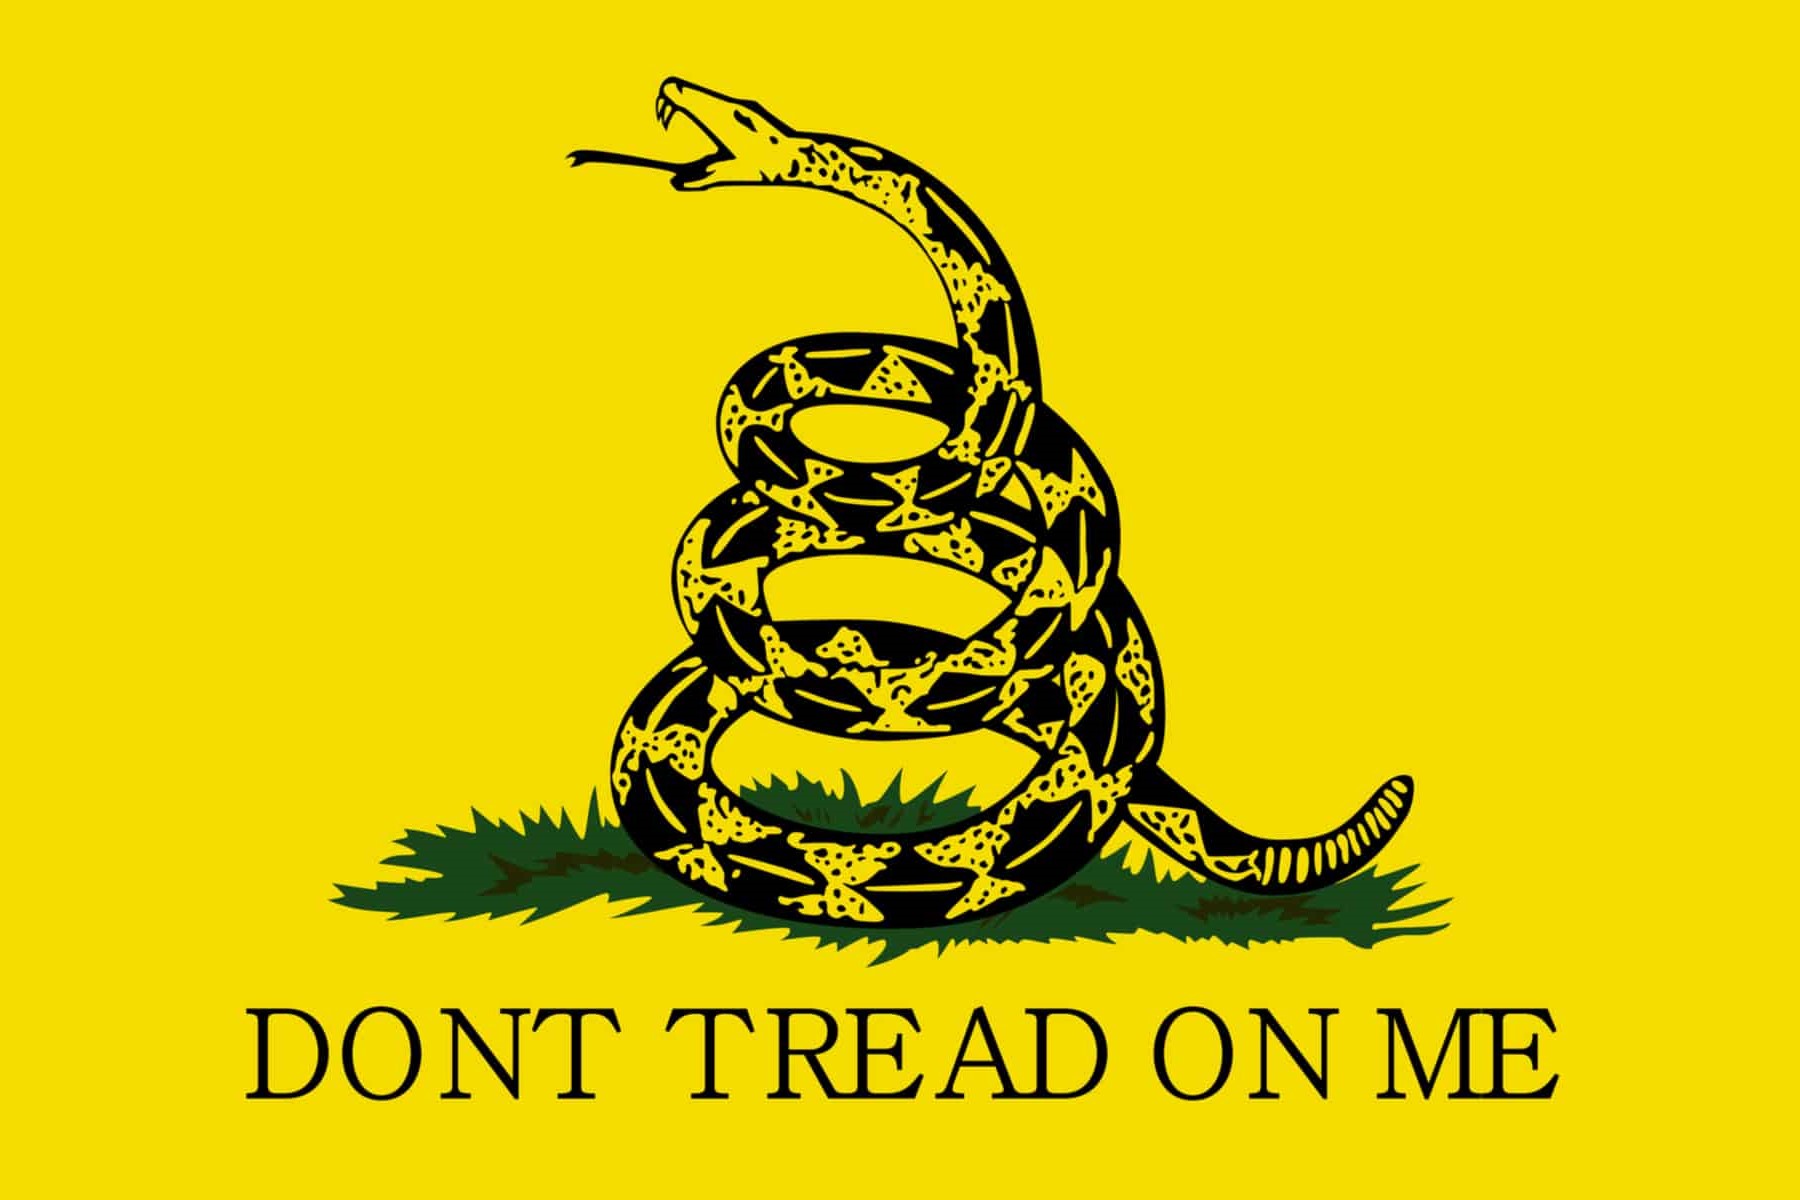 Unraveling The Meaning Behind “Don’t Tread On Me”